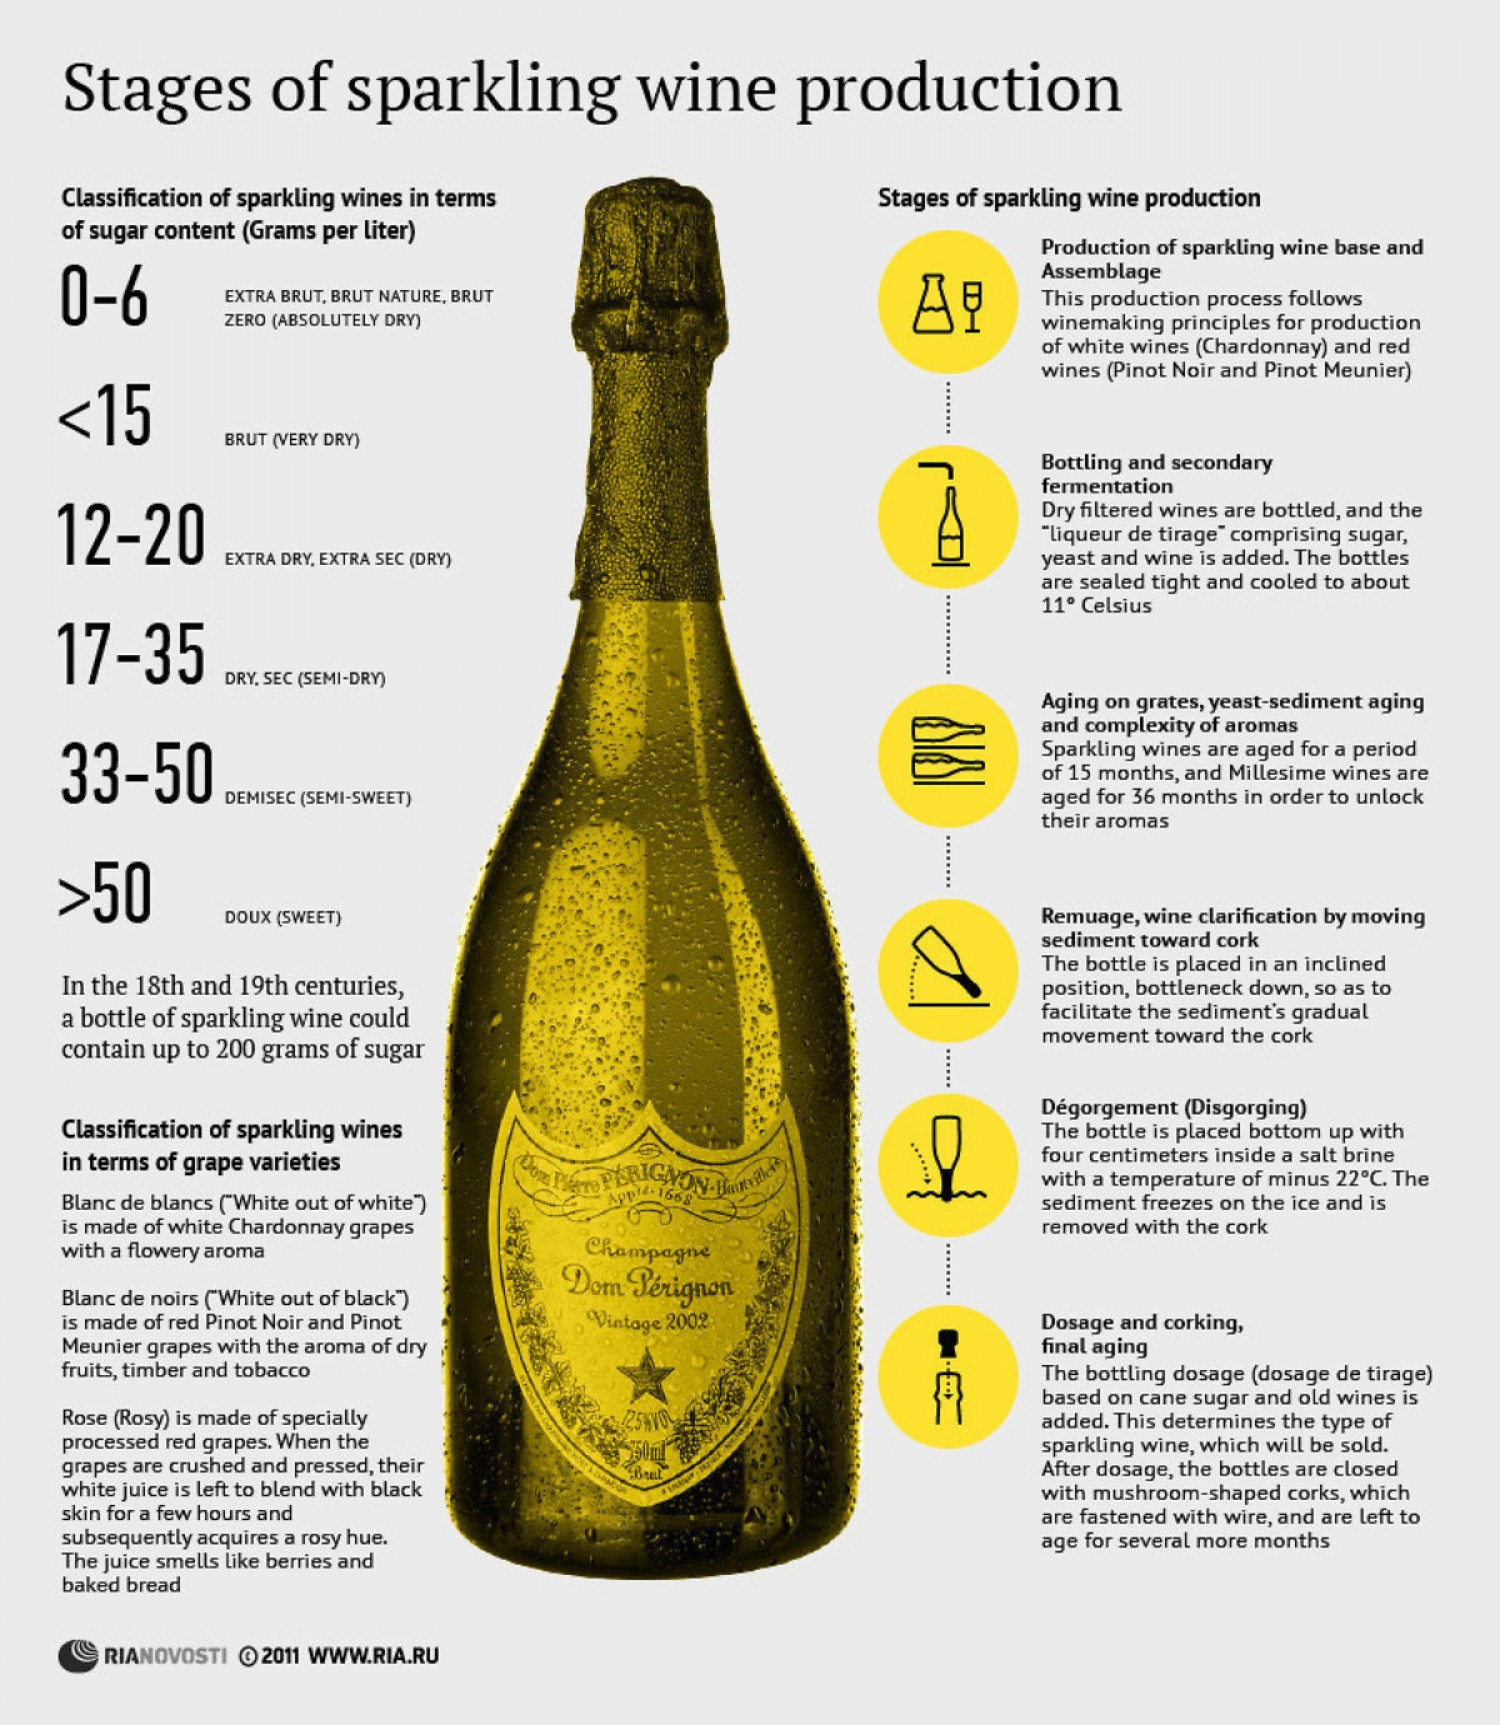 Stages of Sparkling Wine Production Infographic